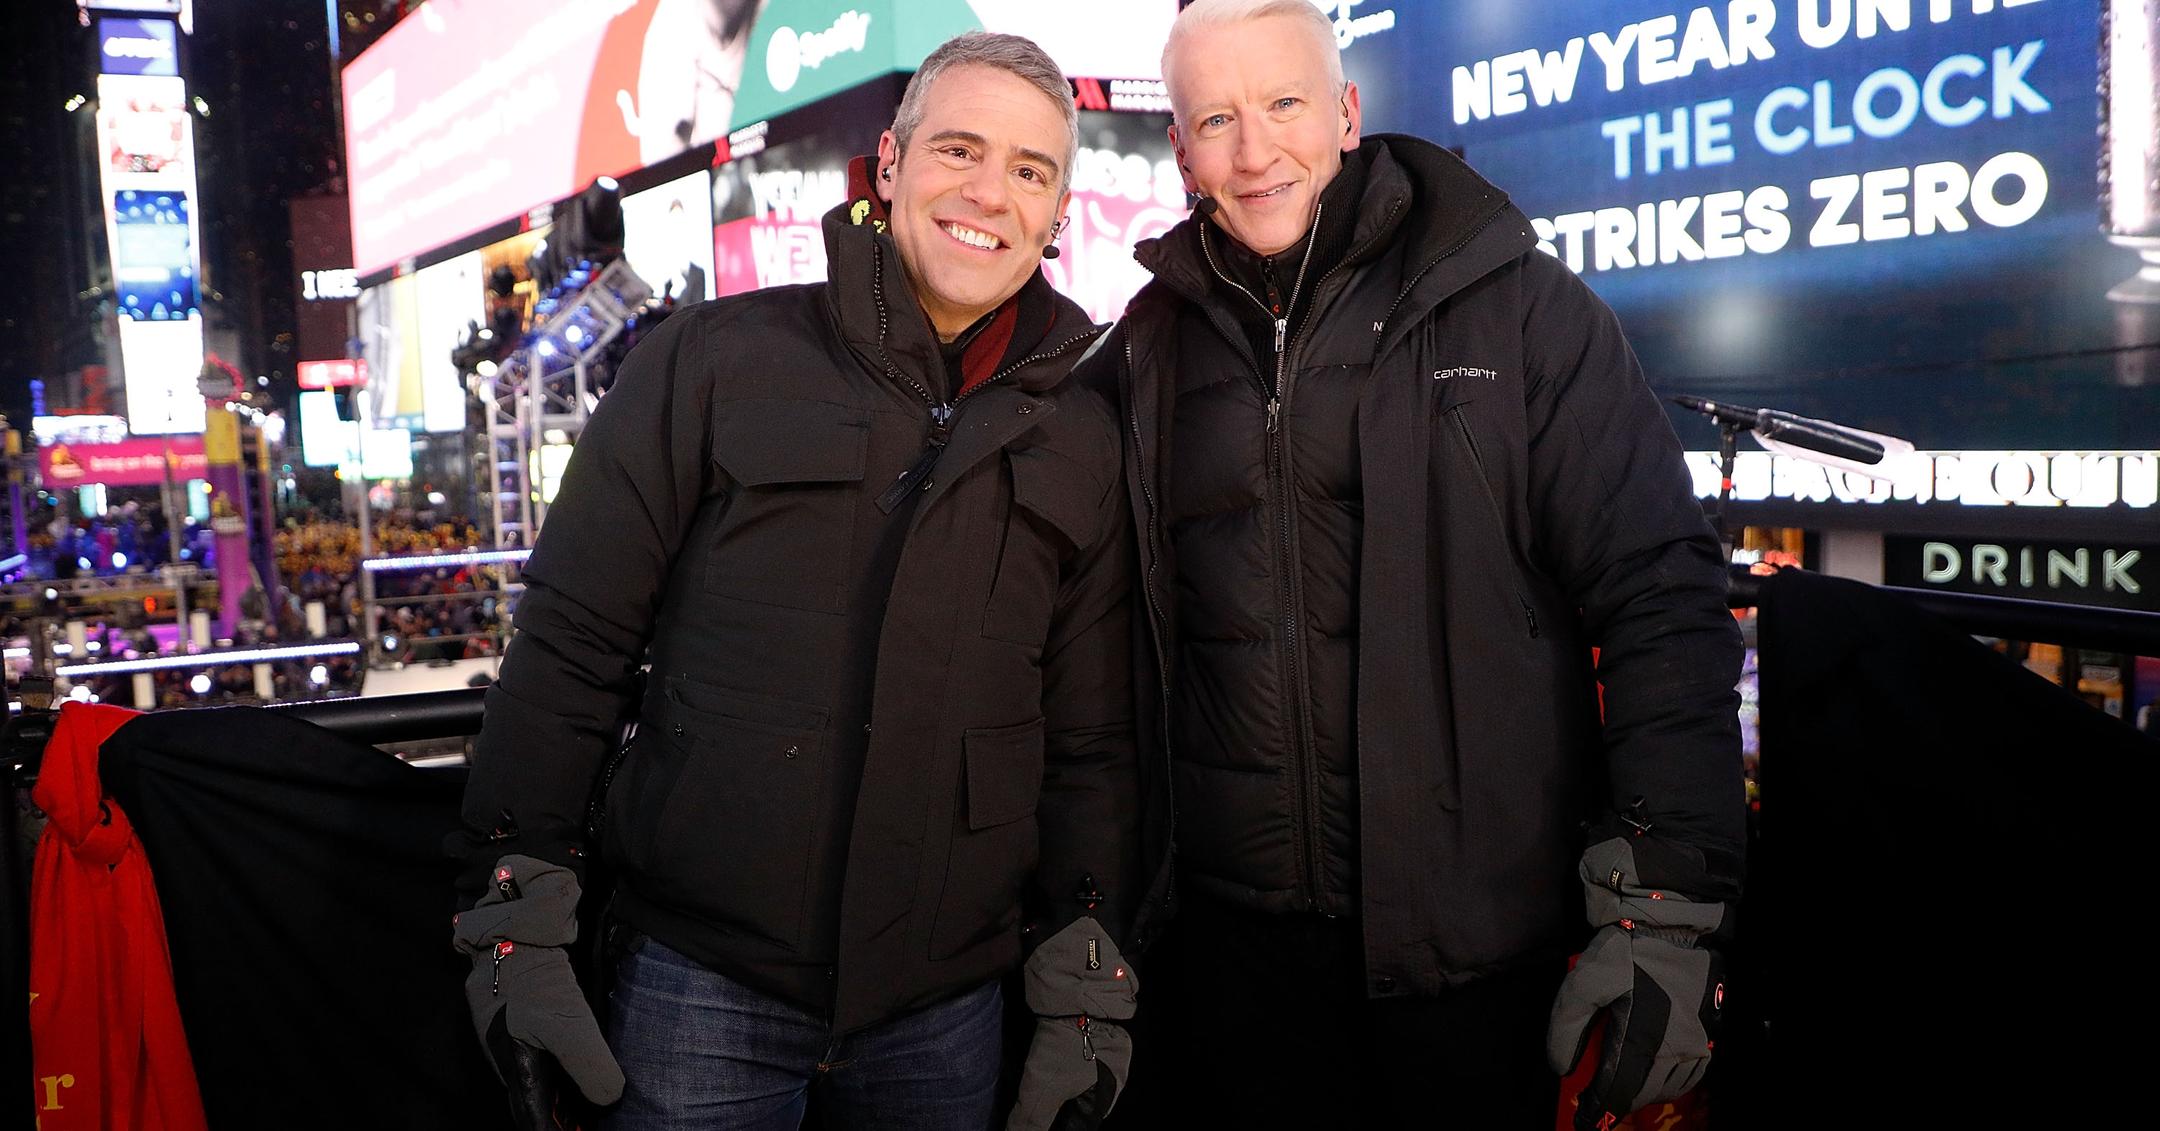 Who Is Anderson Cooper's Partner? Friends Are Hoping It's His CoHost